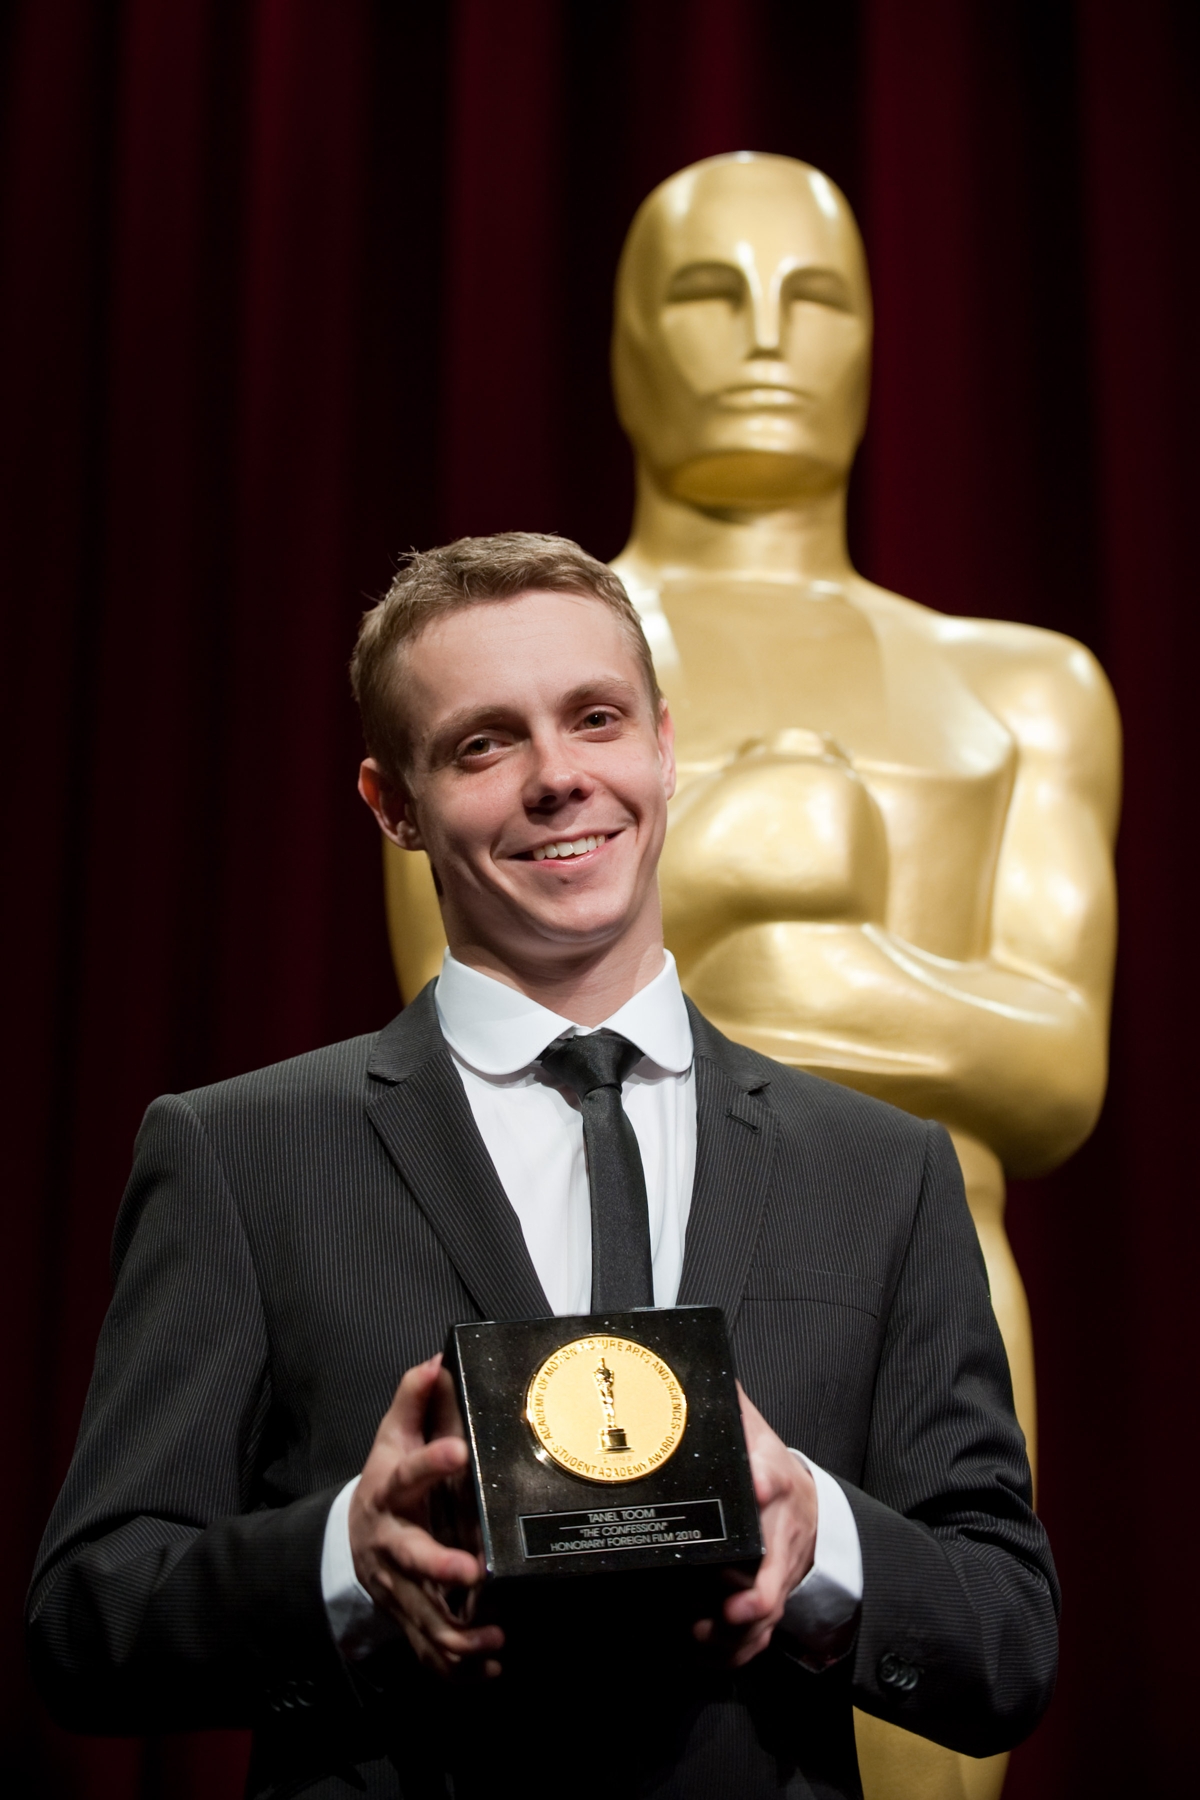 Honorary foreign film winner Tanel Toom at the 37th Annual Student Academy Awards® on Saturday, June 12, 2010, in Beverly Hills.